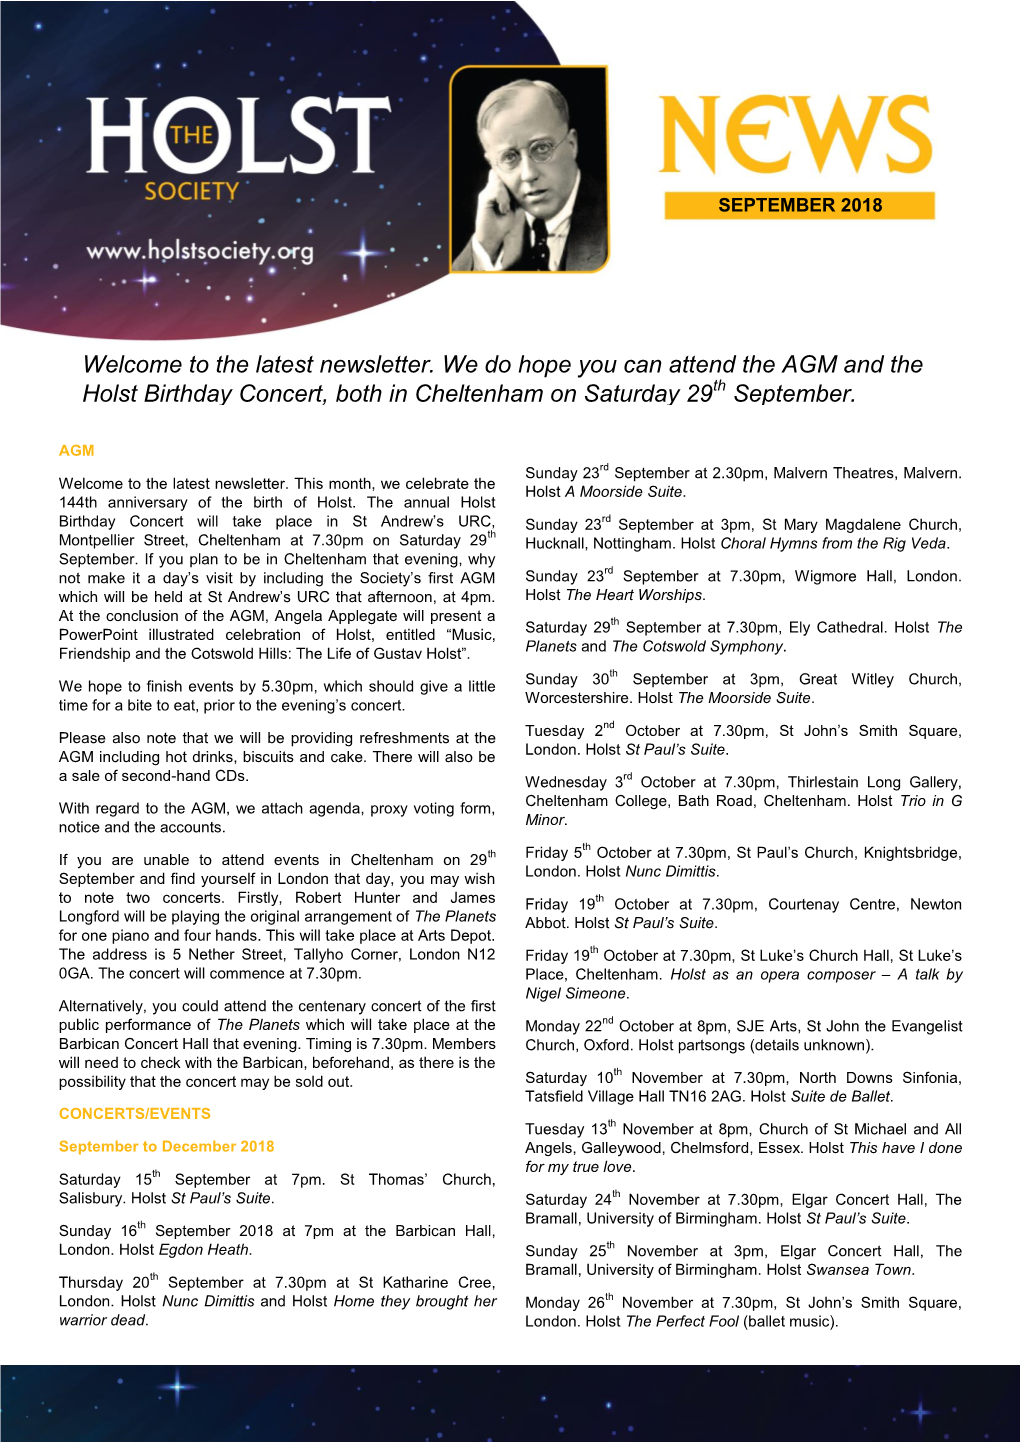 The Latest Newsletter. We Do Hope You Can Attend the AGM and the Holst Birthday Concert, Both in Cheltenham on Saturday 29Th September